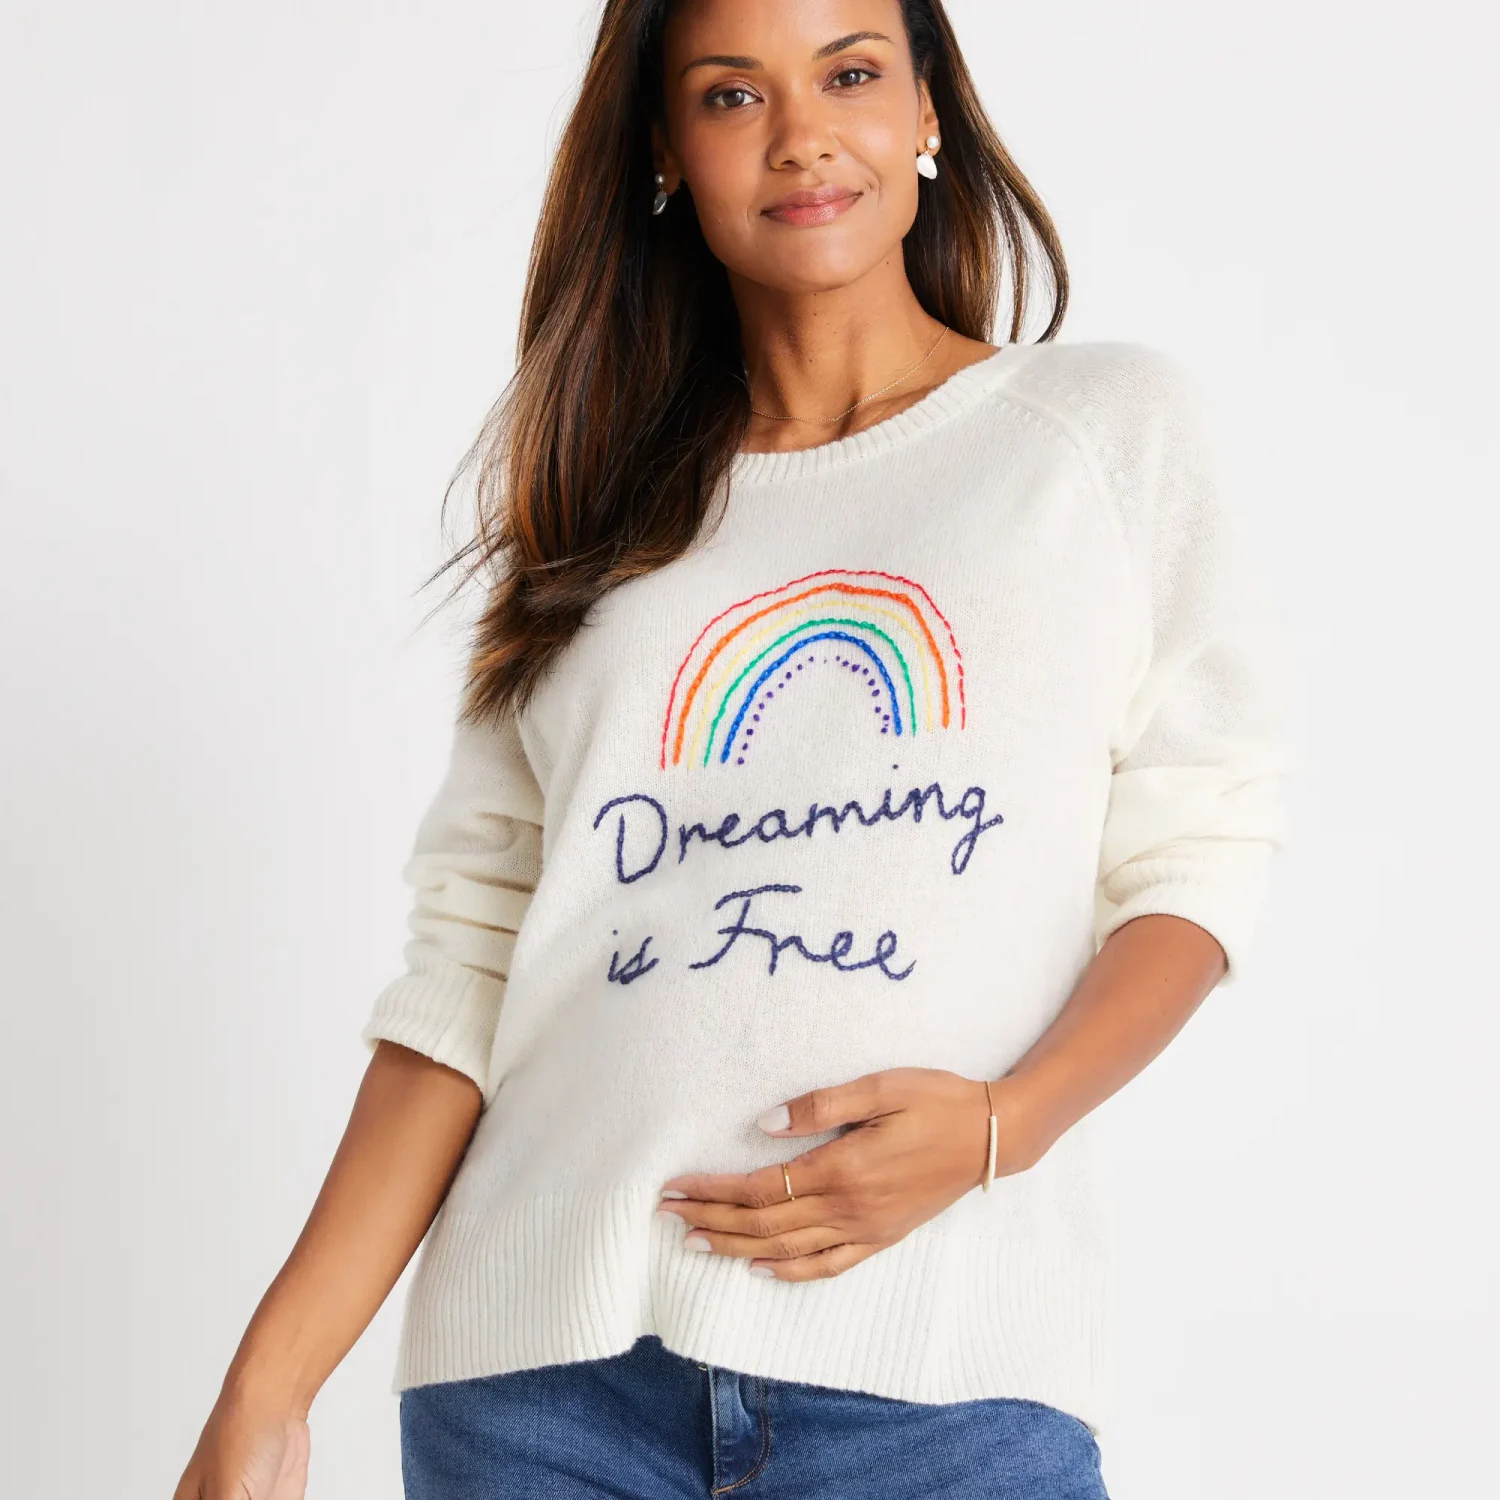 Golden Sun brand contemporary and stylish maternity friendly cashmere sweater tops with rainbow